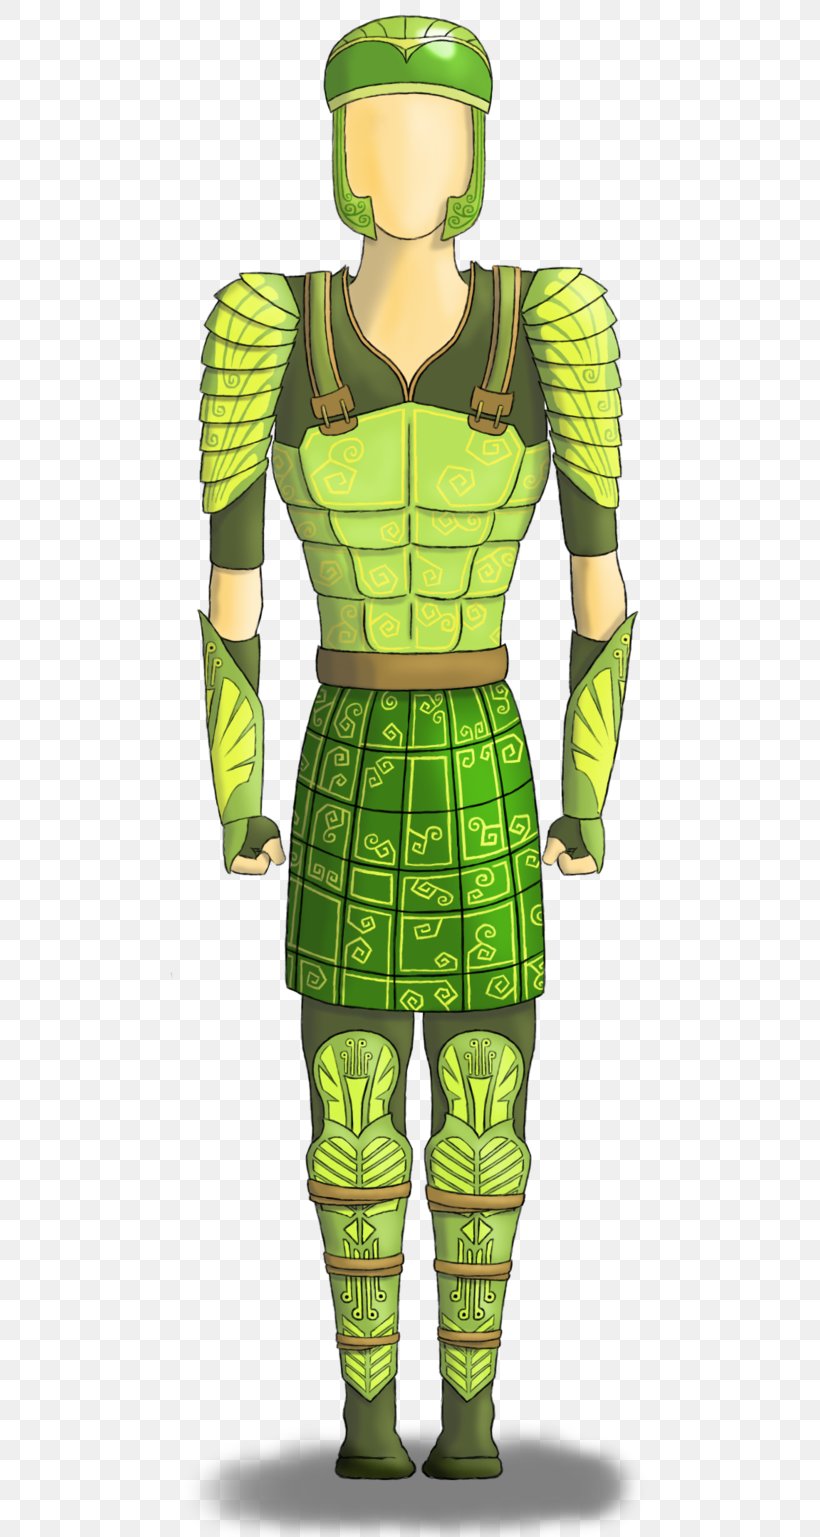 Costume Design Cartoon Armour Character, PNG, 520x1537px, Costume Design, Animated Cartoon, Armour, Cartoon, Character Download Free